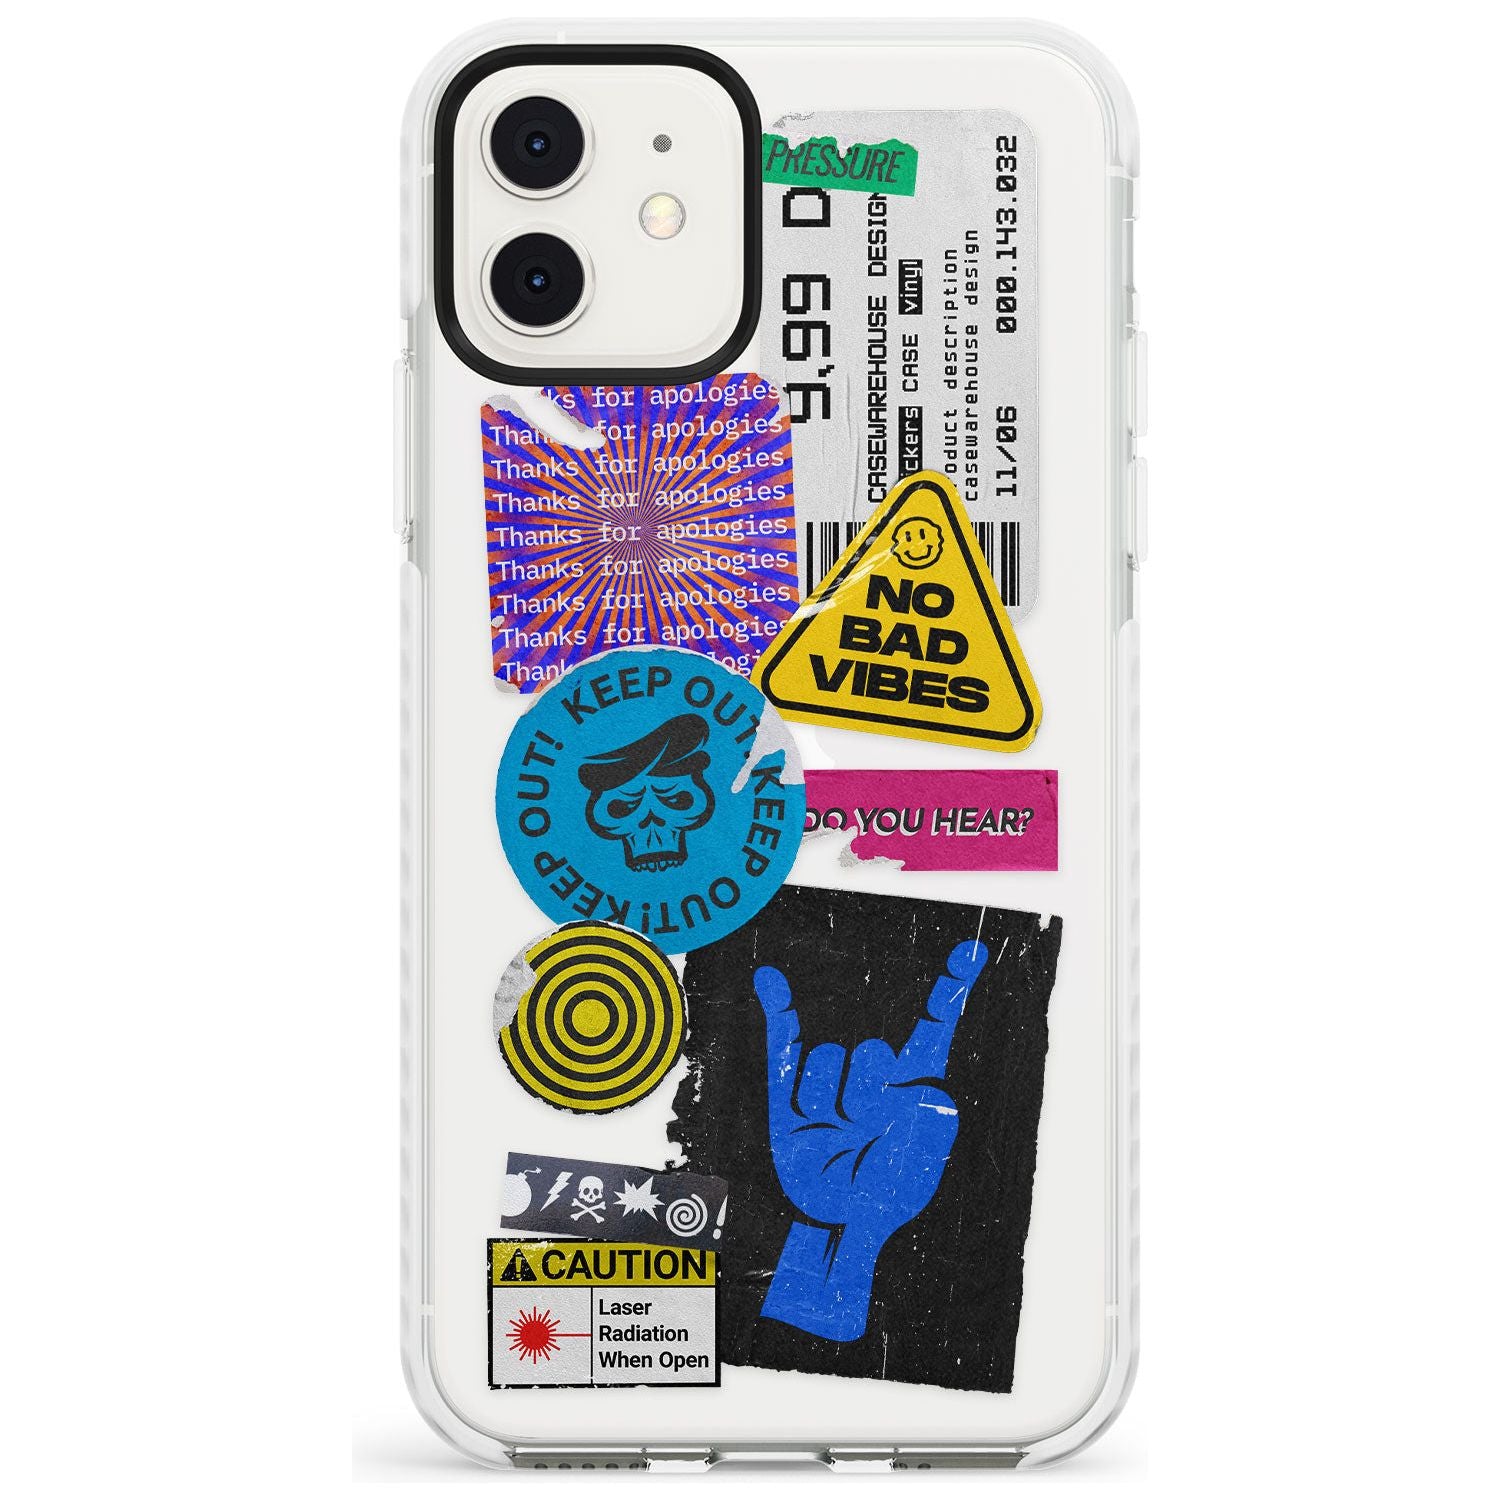 No Bad Vibes Sticker Mix Slim TPU Phone Case for iPhone 11